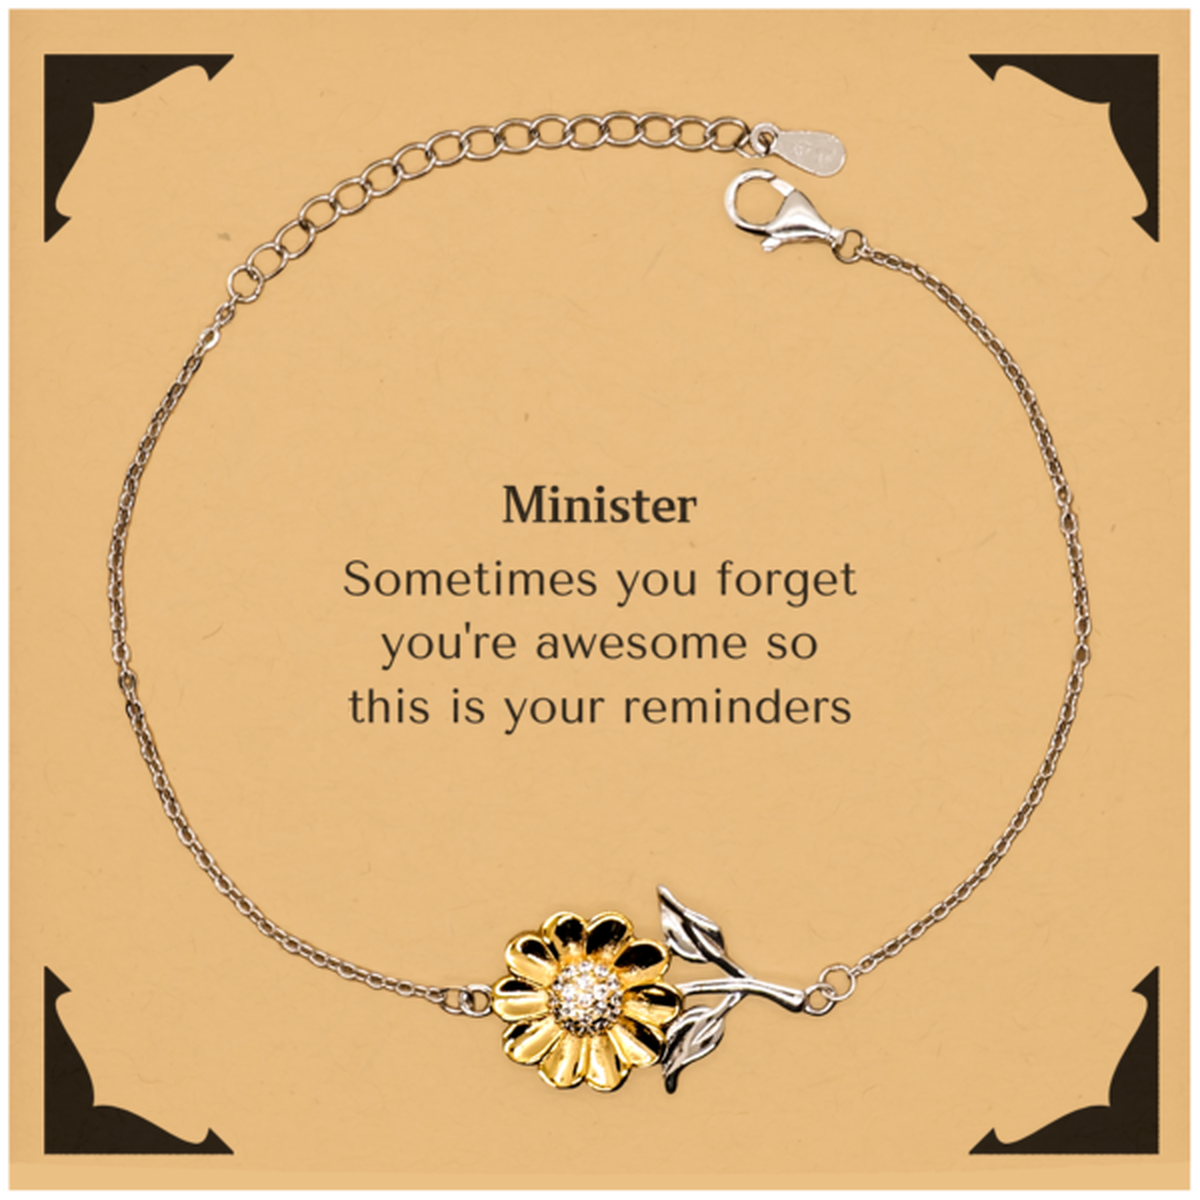 Sentimental Minister Sunflower Bracelet, Minister Sometimes you forget you're awesome so this is your reminders, Graduation Christmas Birthday Gifts for Minister, Men, Women, Coworkers